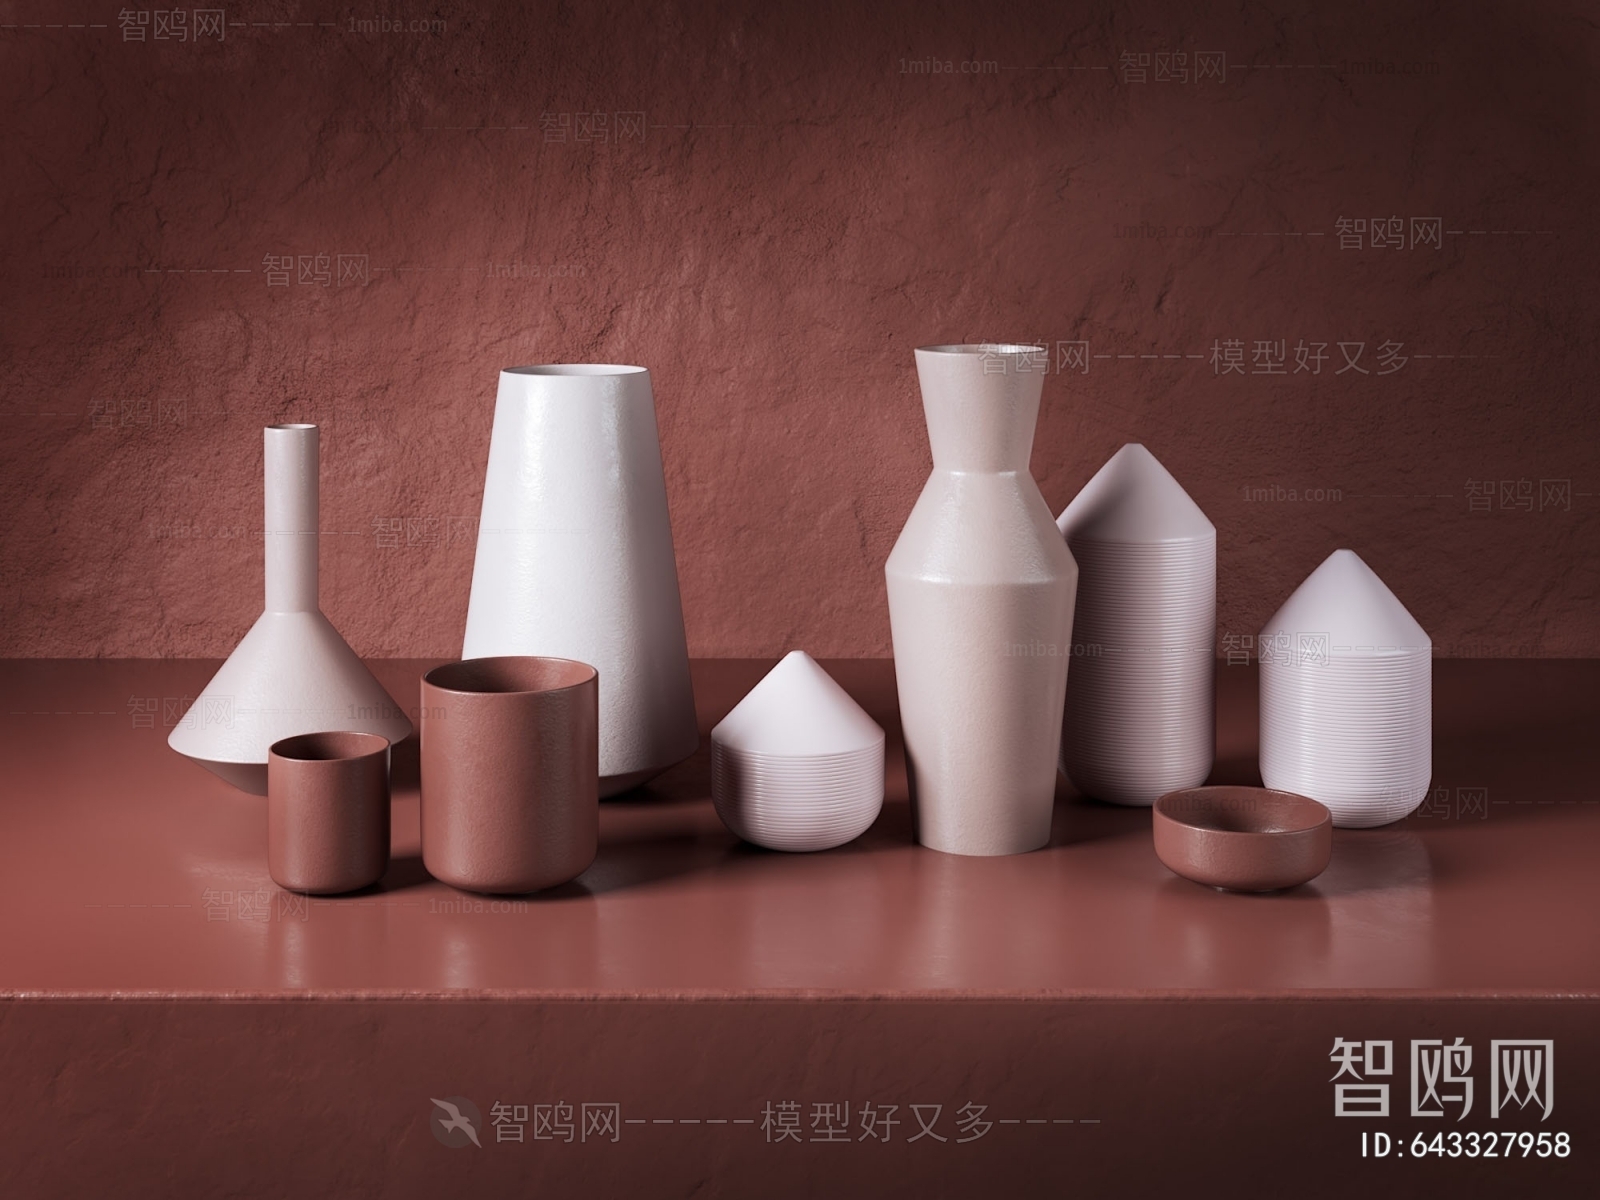 New Chinese Style Clay Pot